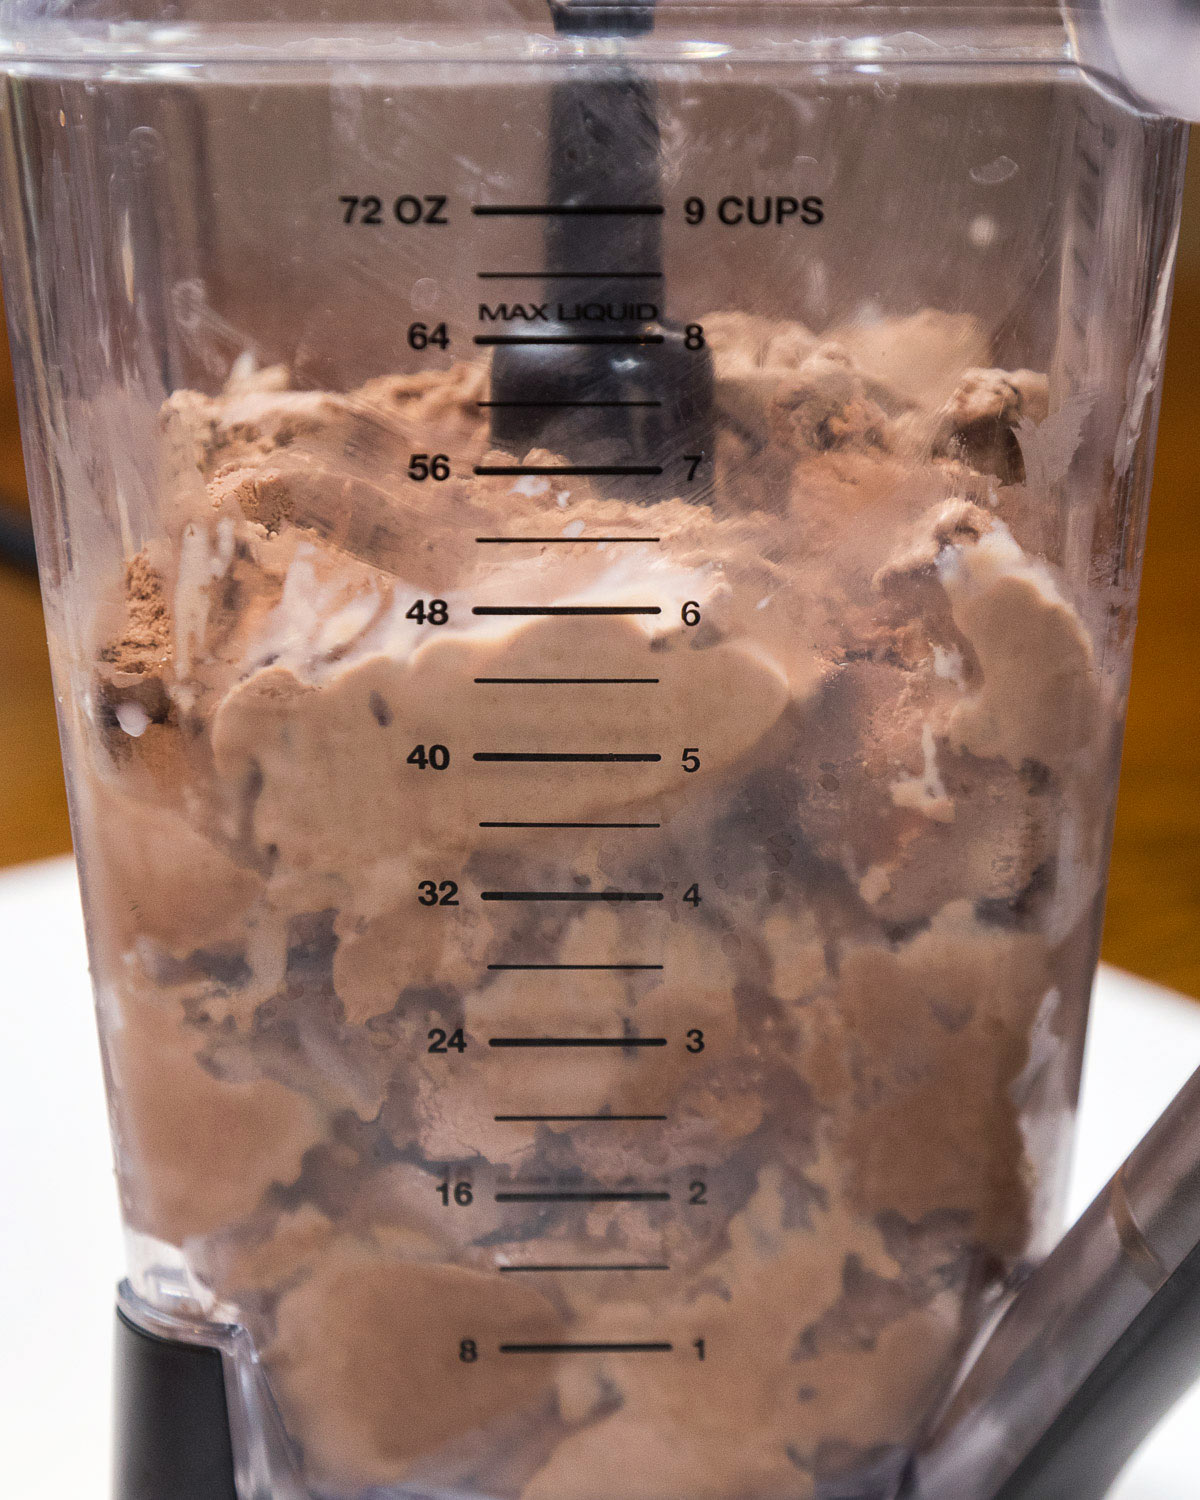 You can fill it up to the six cup mark on the blender instead of using a measuring cup.